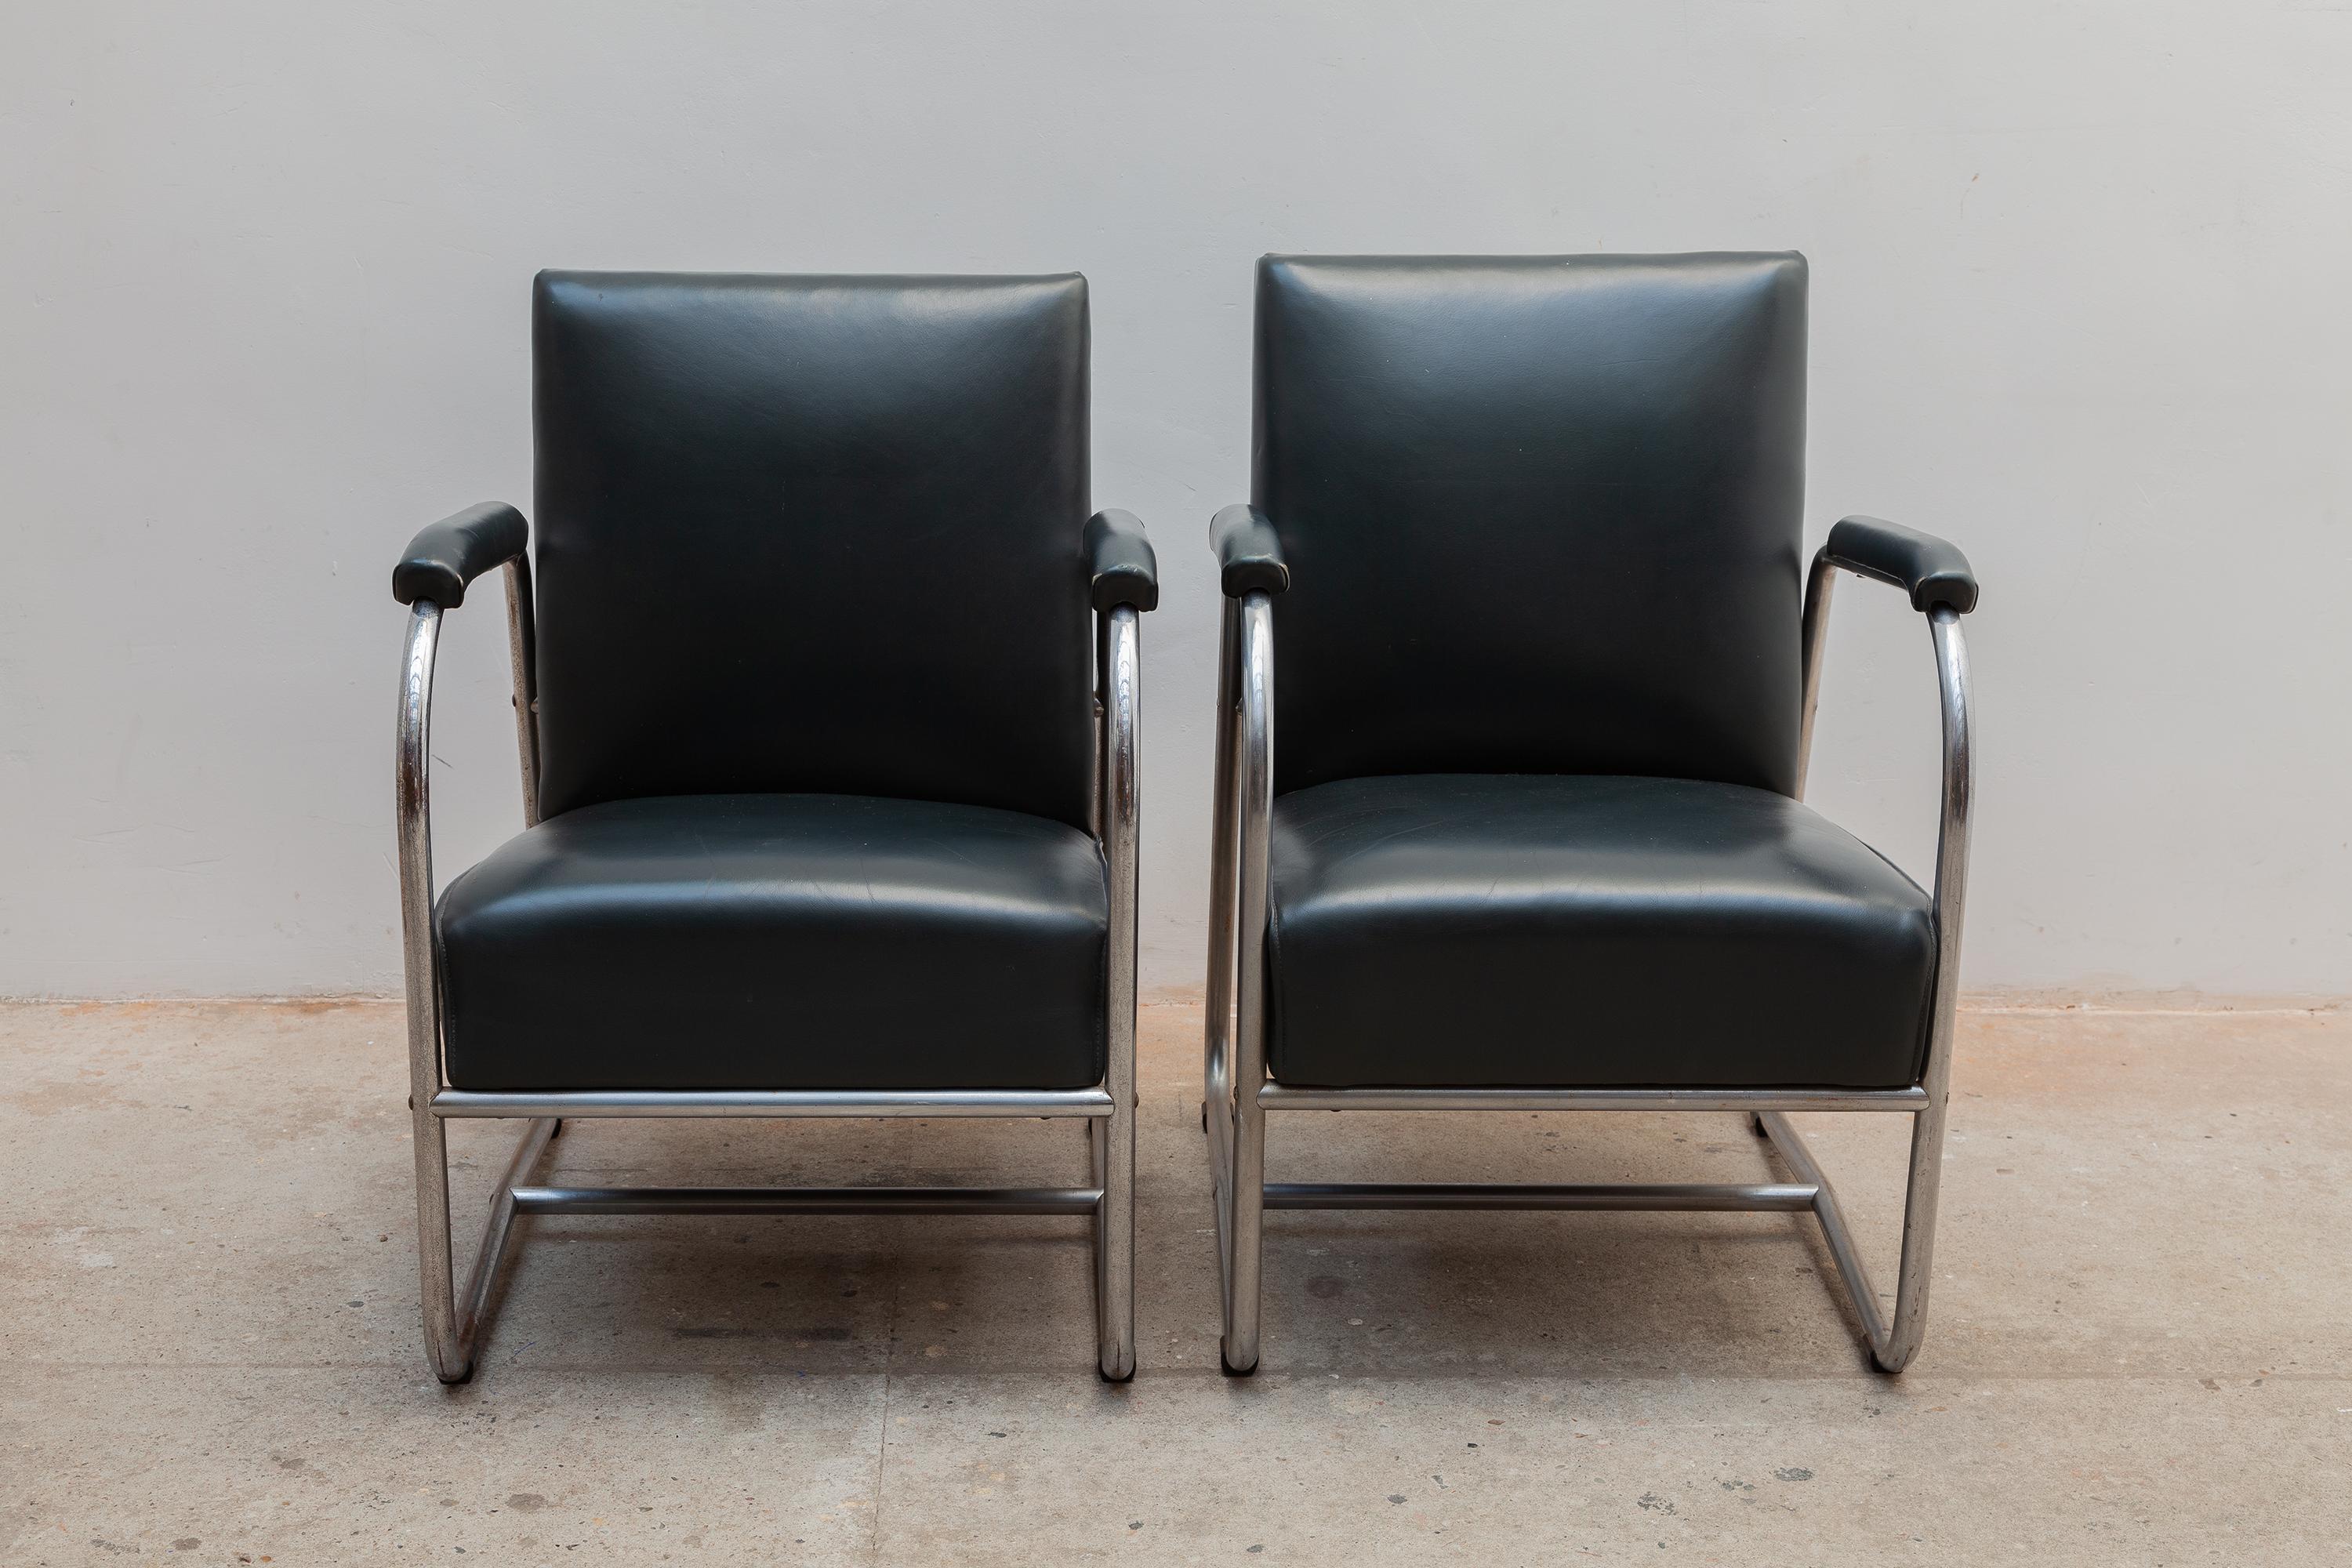 A pair of 1930s modernist lounge armchairs. Tubular chrome frames with original green faux leather upholstery -- no rips.
Dimensions: 53 W x 75 H x 54 D cm, seat 45cm high.